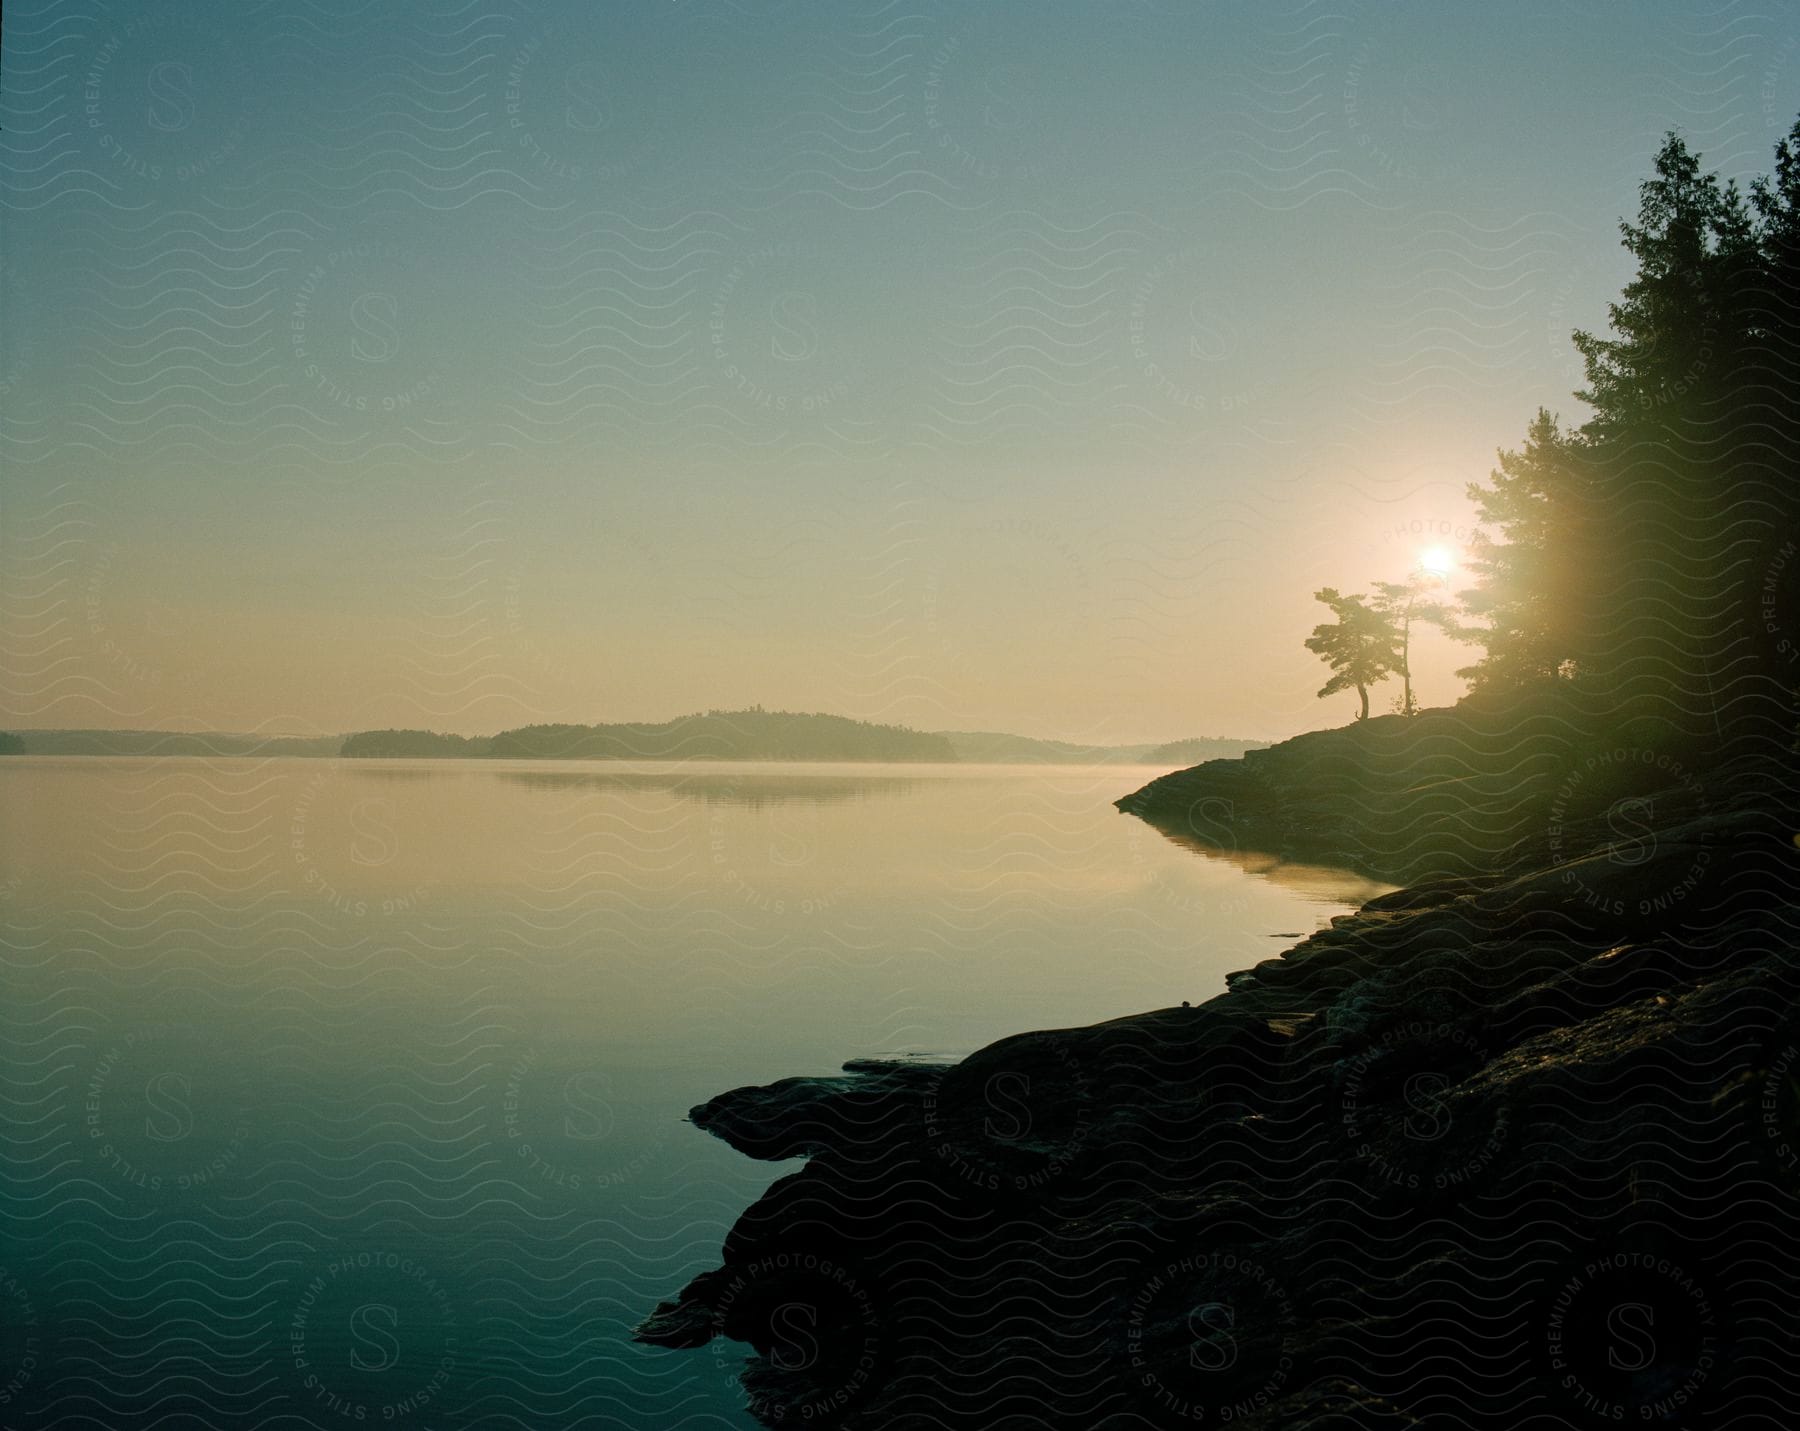 A sunset view of a lakes shoreline with rocks and trees